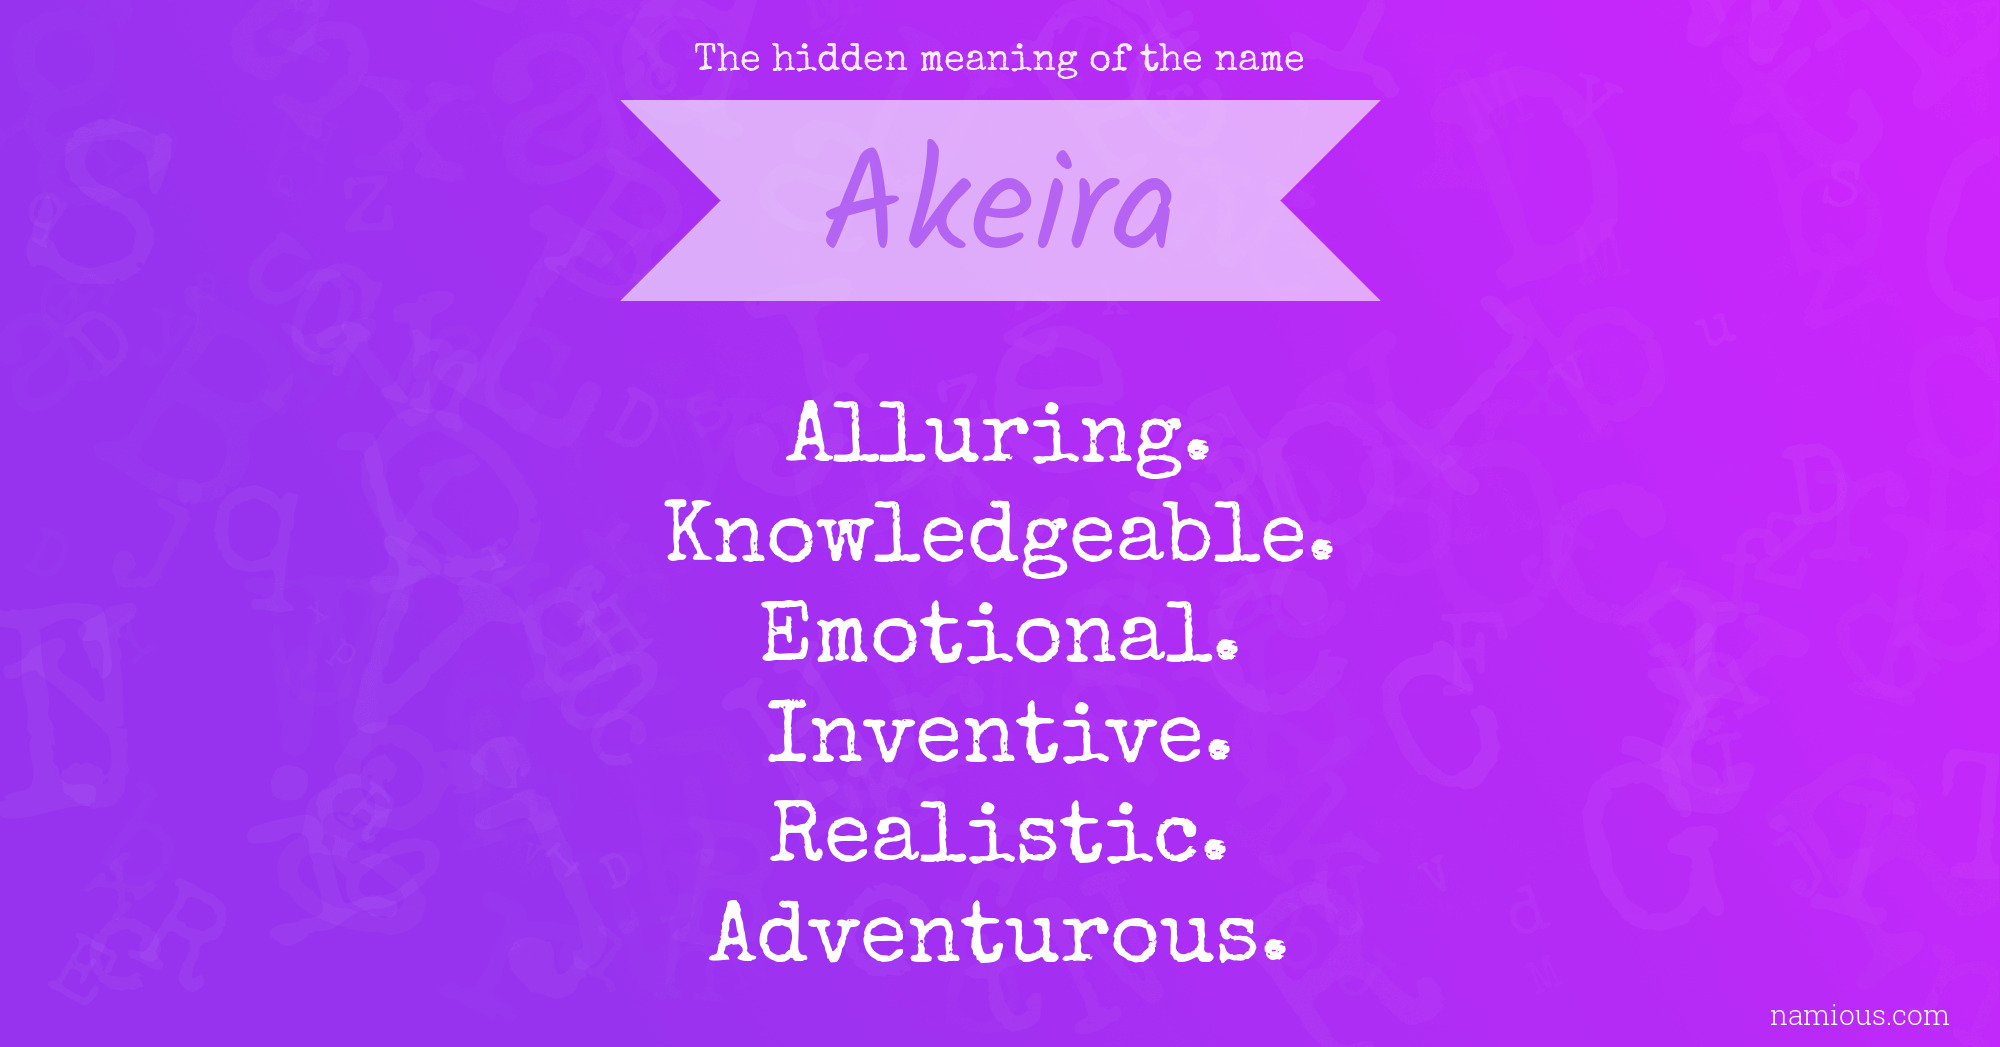 The hidden meaning of the name Akeira